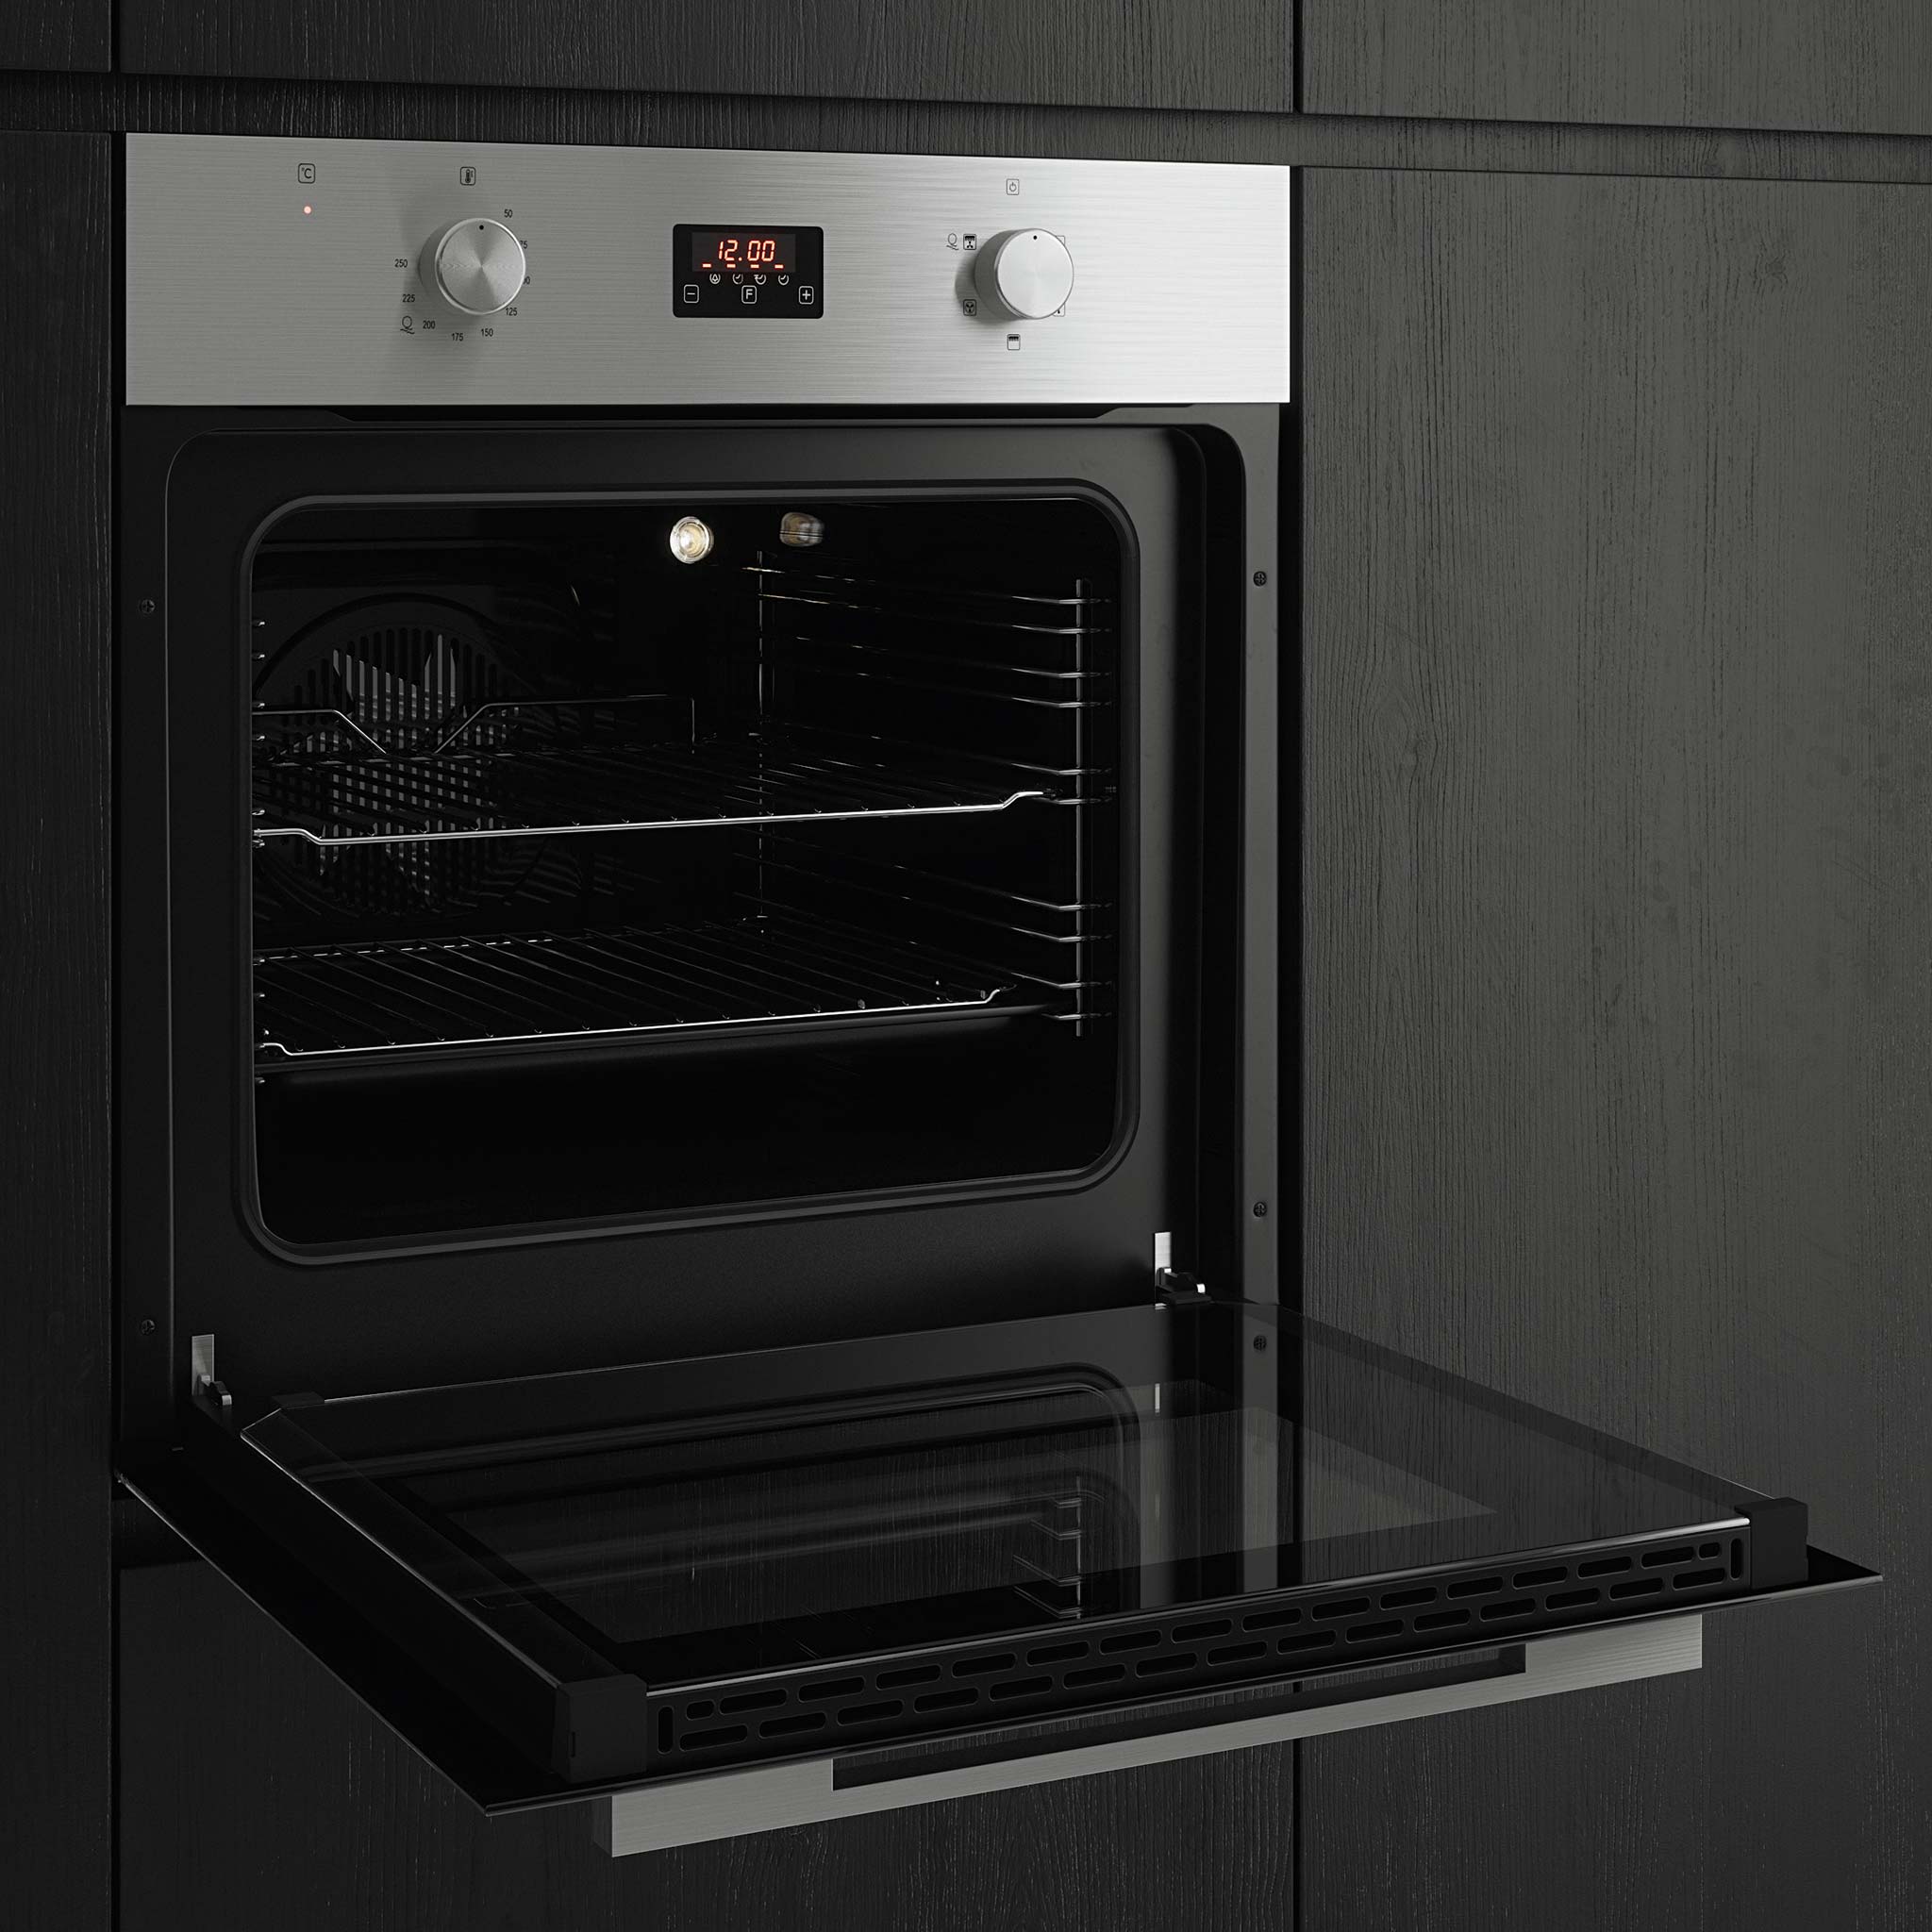 What is the standard single oven capacity?